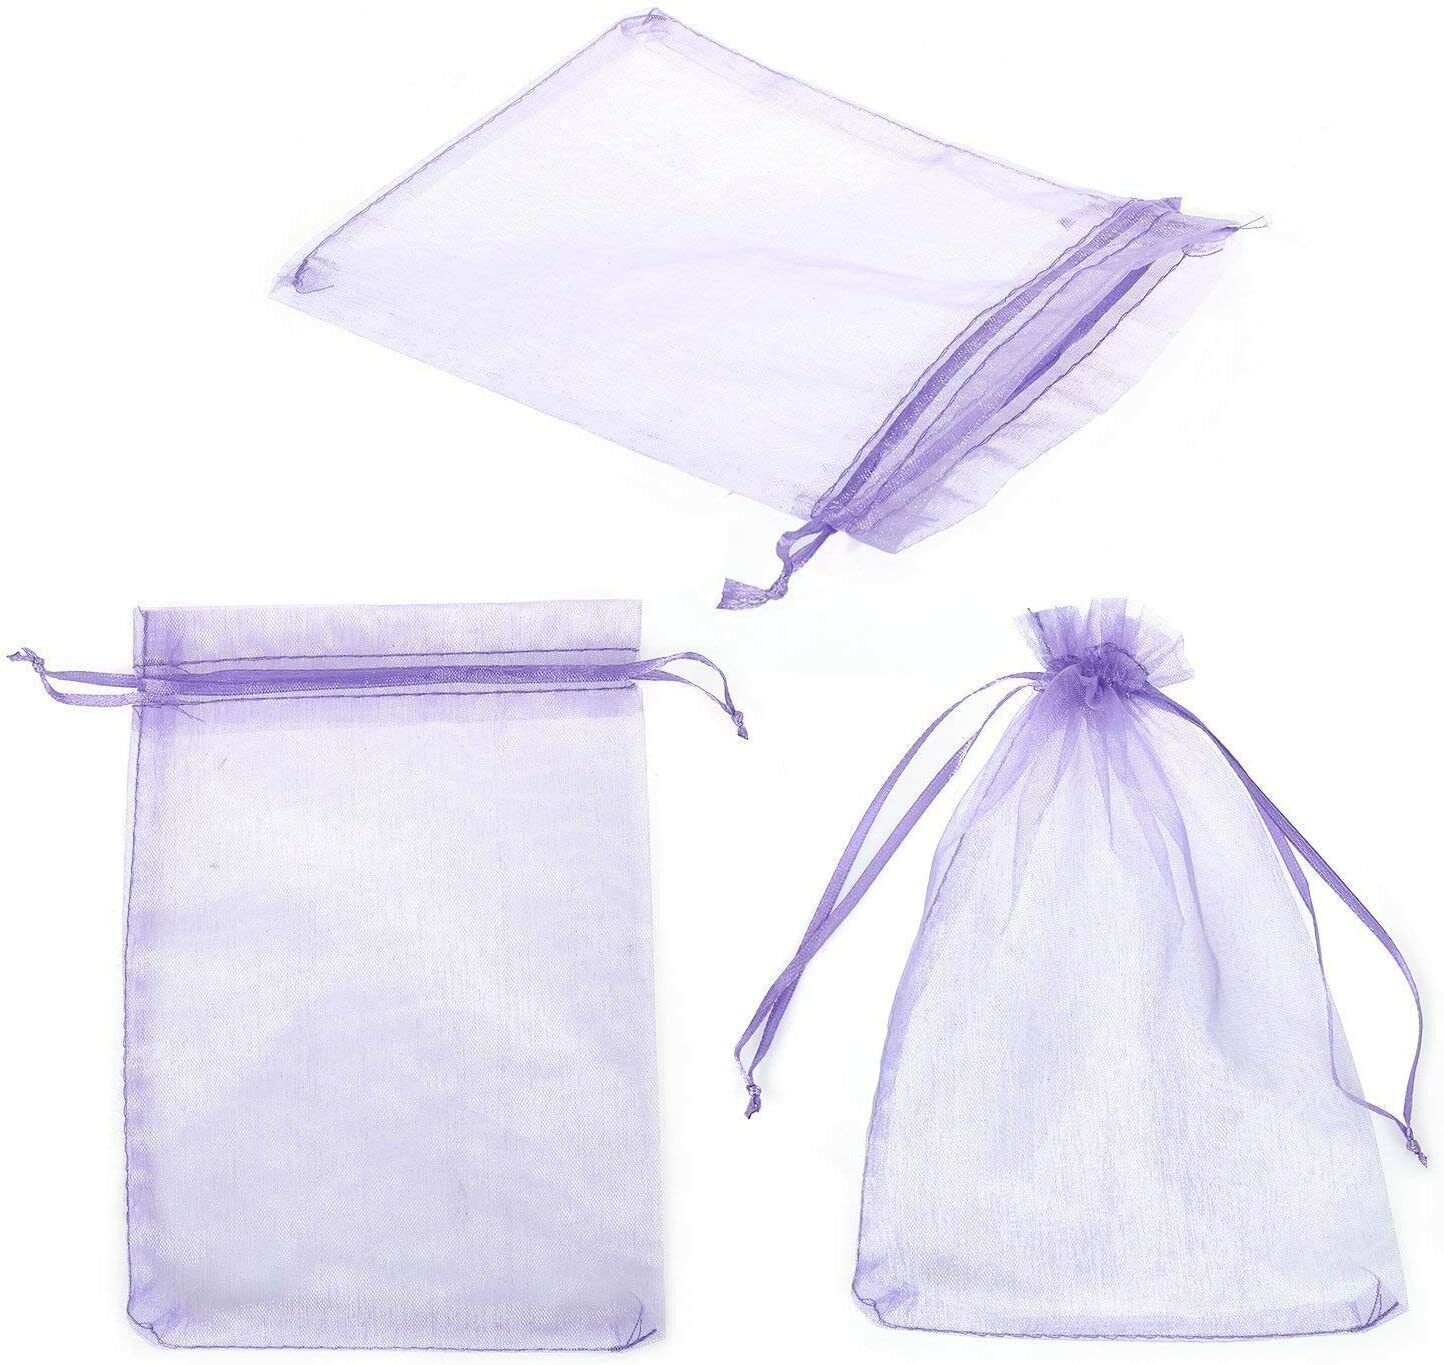  New "4x4" Drawstring Organza Bags Jewelry Pouches Wedding Party Favor Gift Bags Unbranded - фотография #2